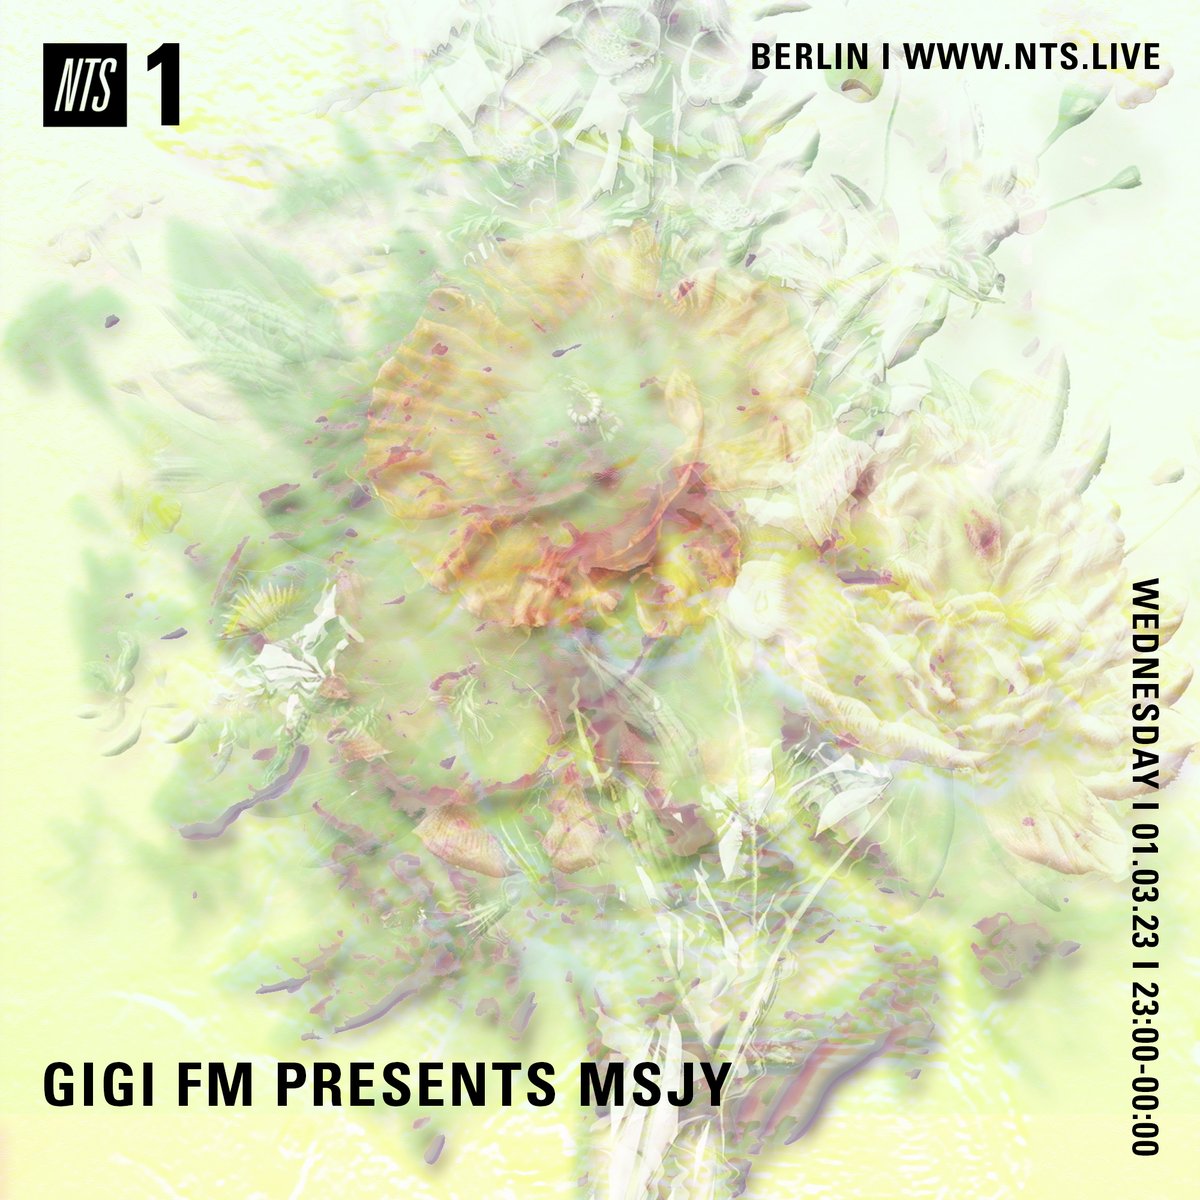 @NTSlive Up next, @GiGiFM3 present a liquid journey narrating Pluto moving into Aquarius for the next 20 years from guest MSJY Tune in: nts.live/1